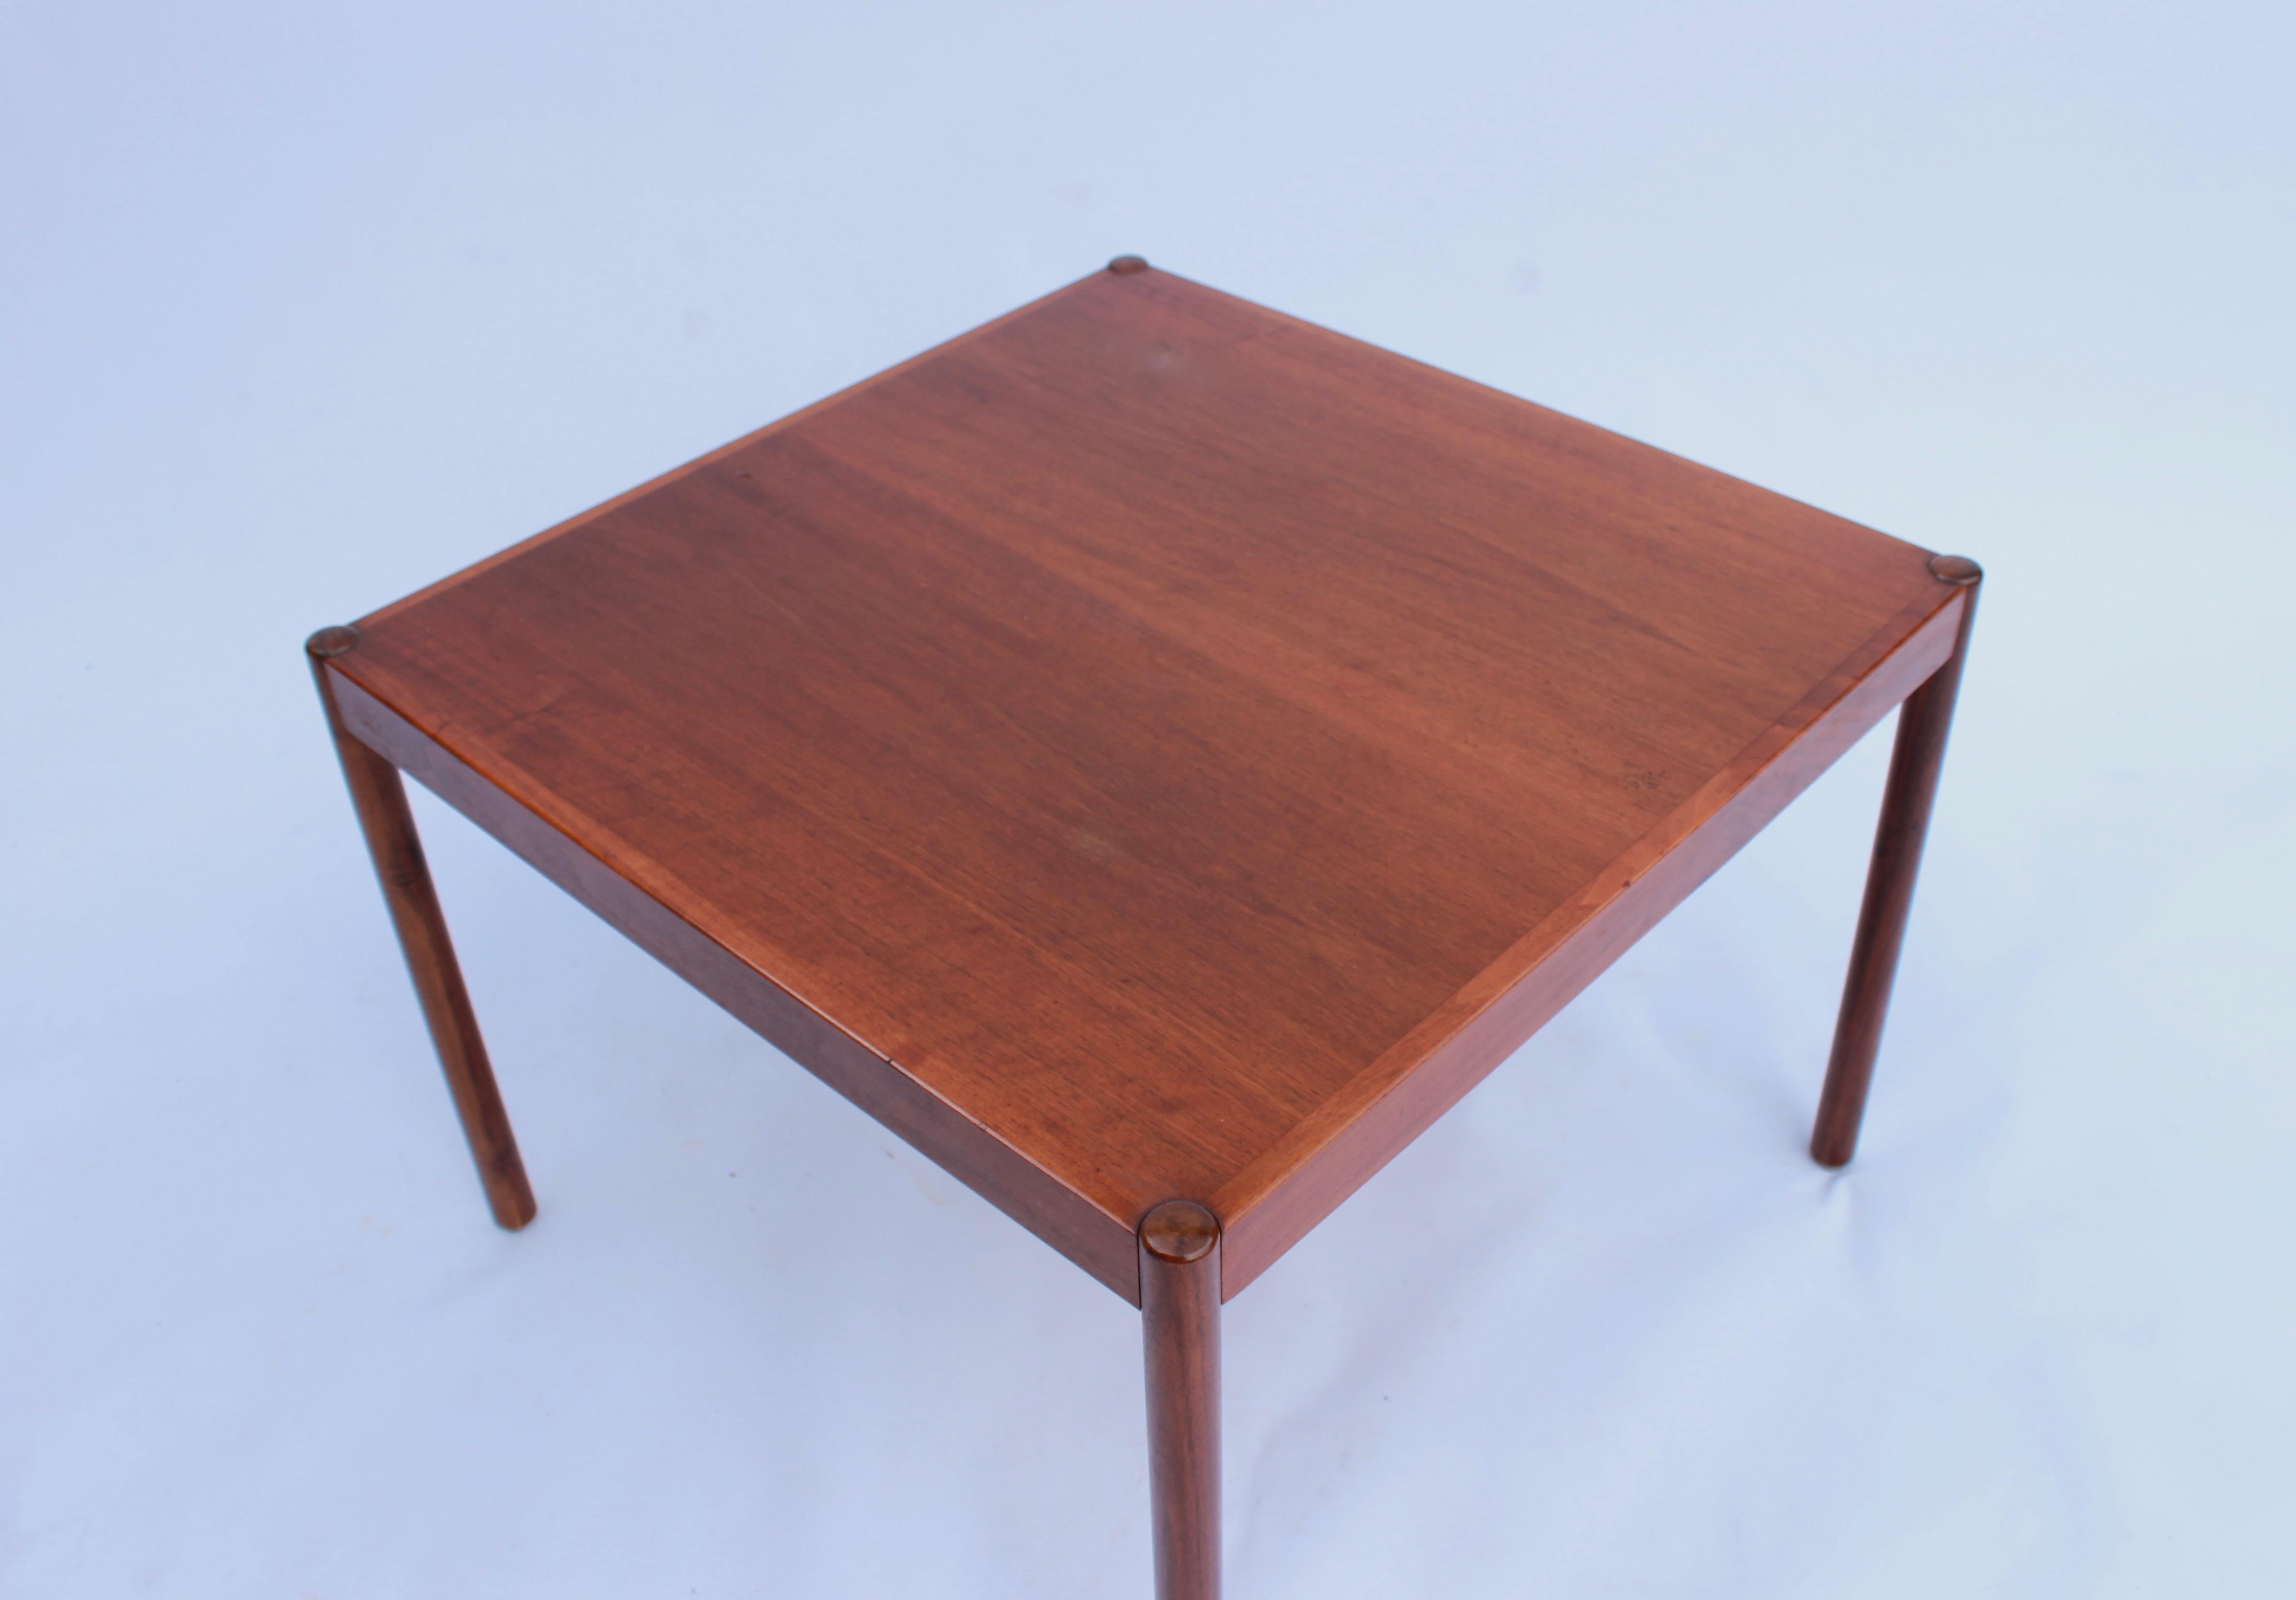 Small lamp table in teak of Danish design from the 1960s. The table is in great vintage condition.